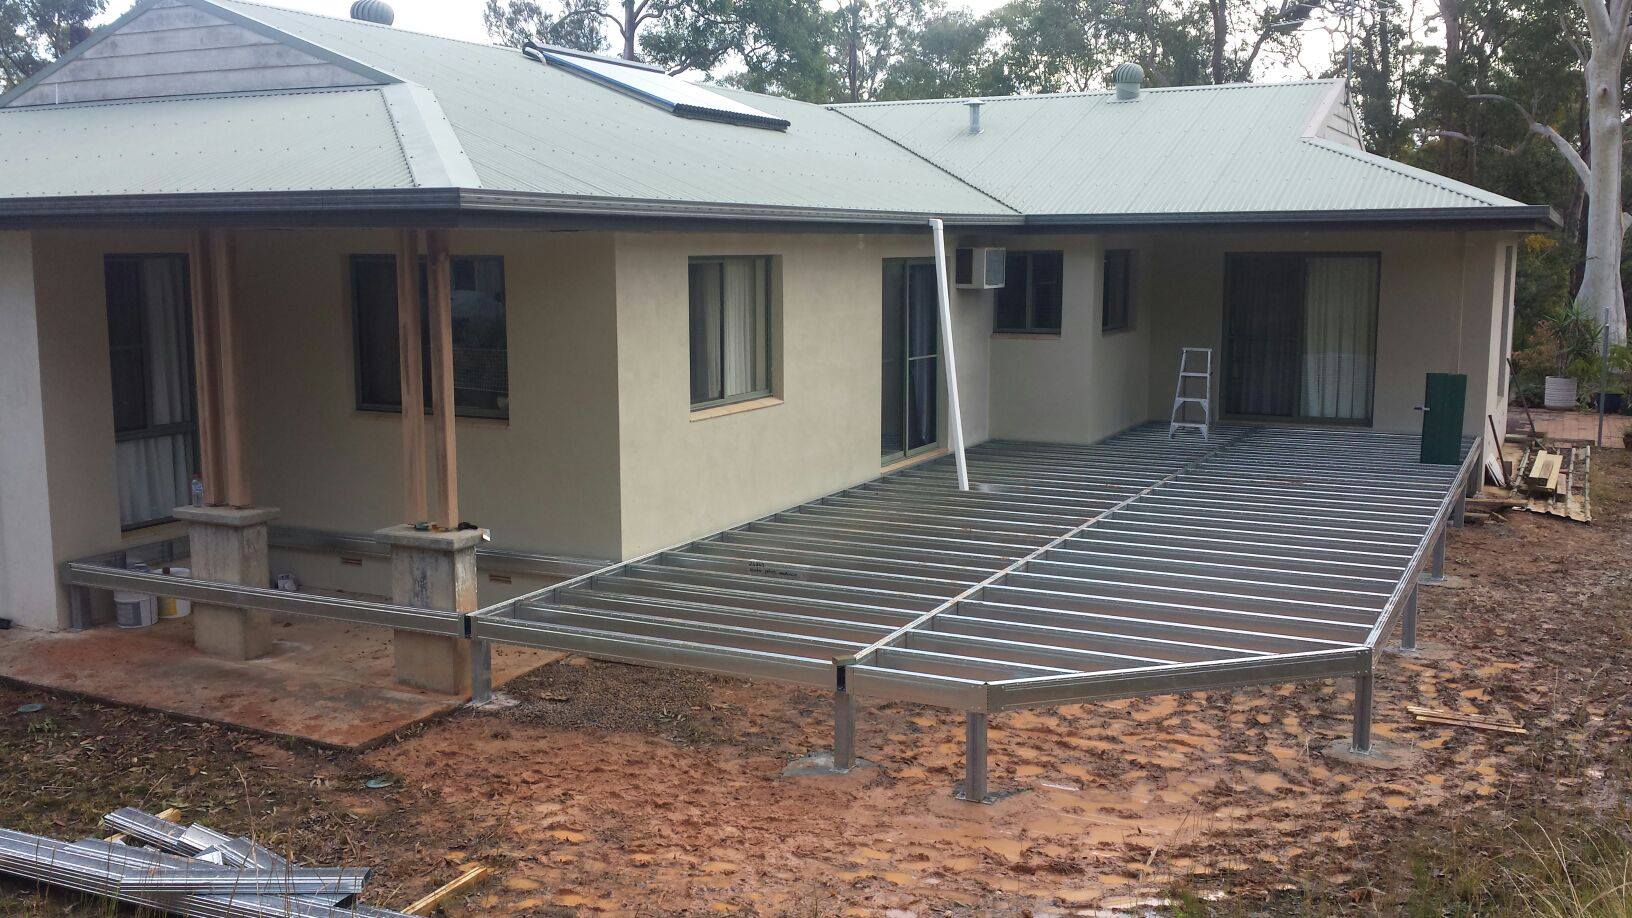 Boxspan deck frame added to existing house increasing the outdoor living space